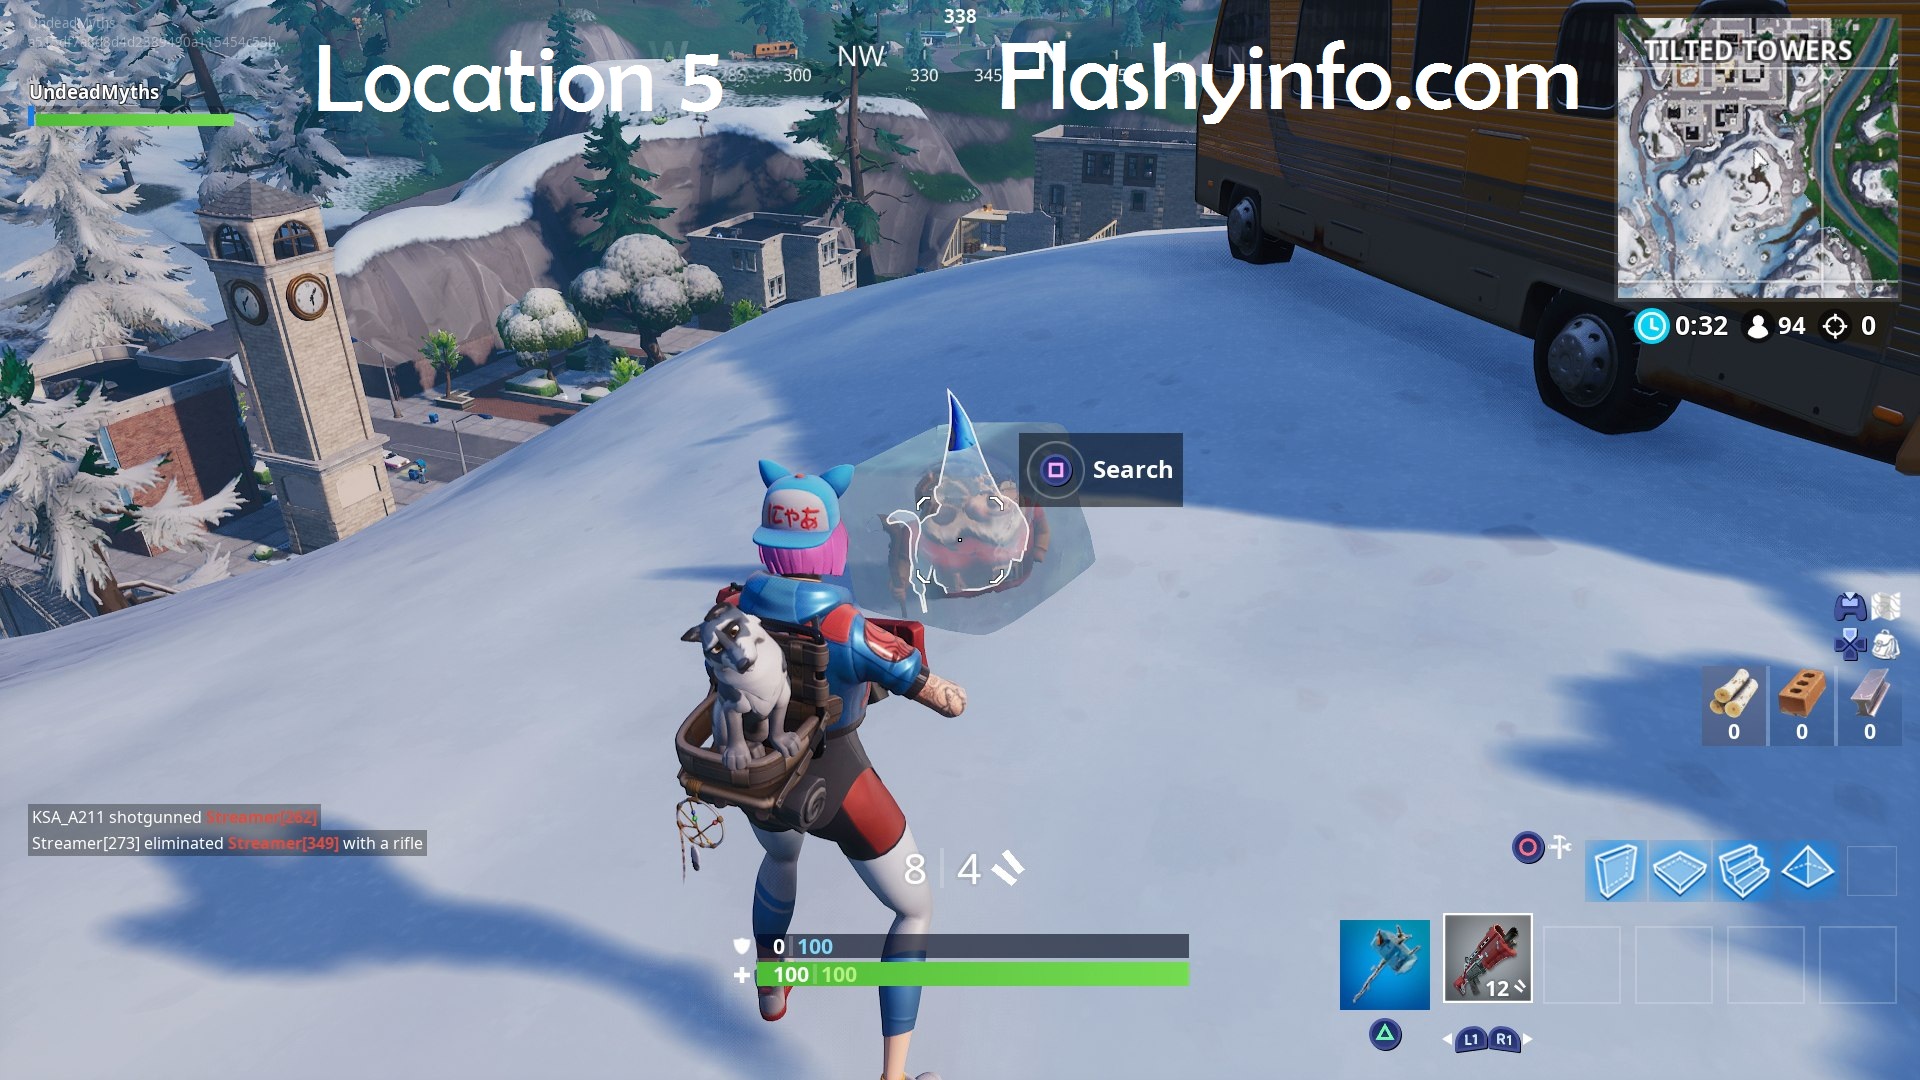 Fortnite Chilly Gnomes Location 5